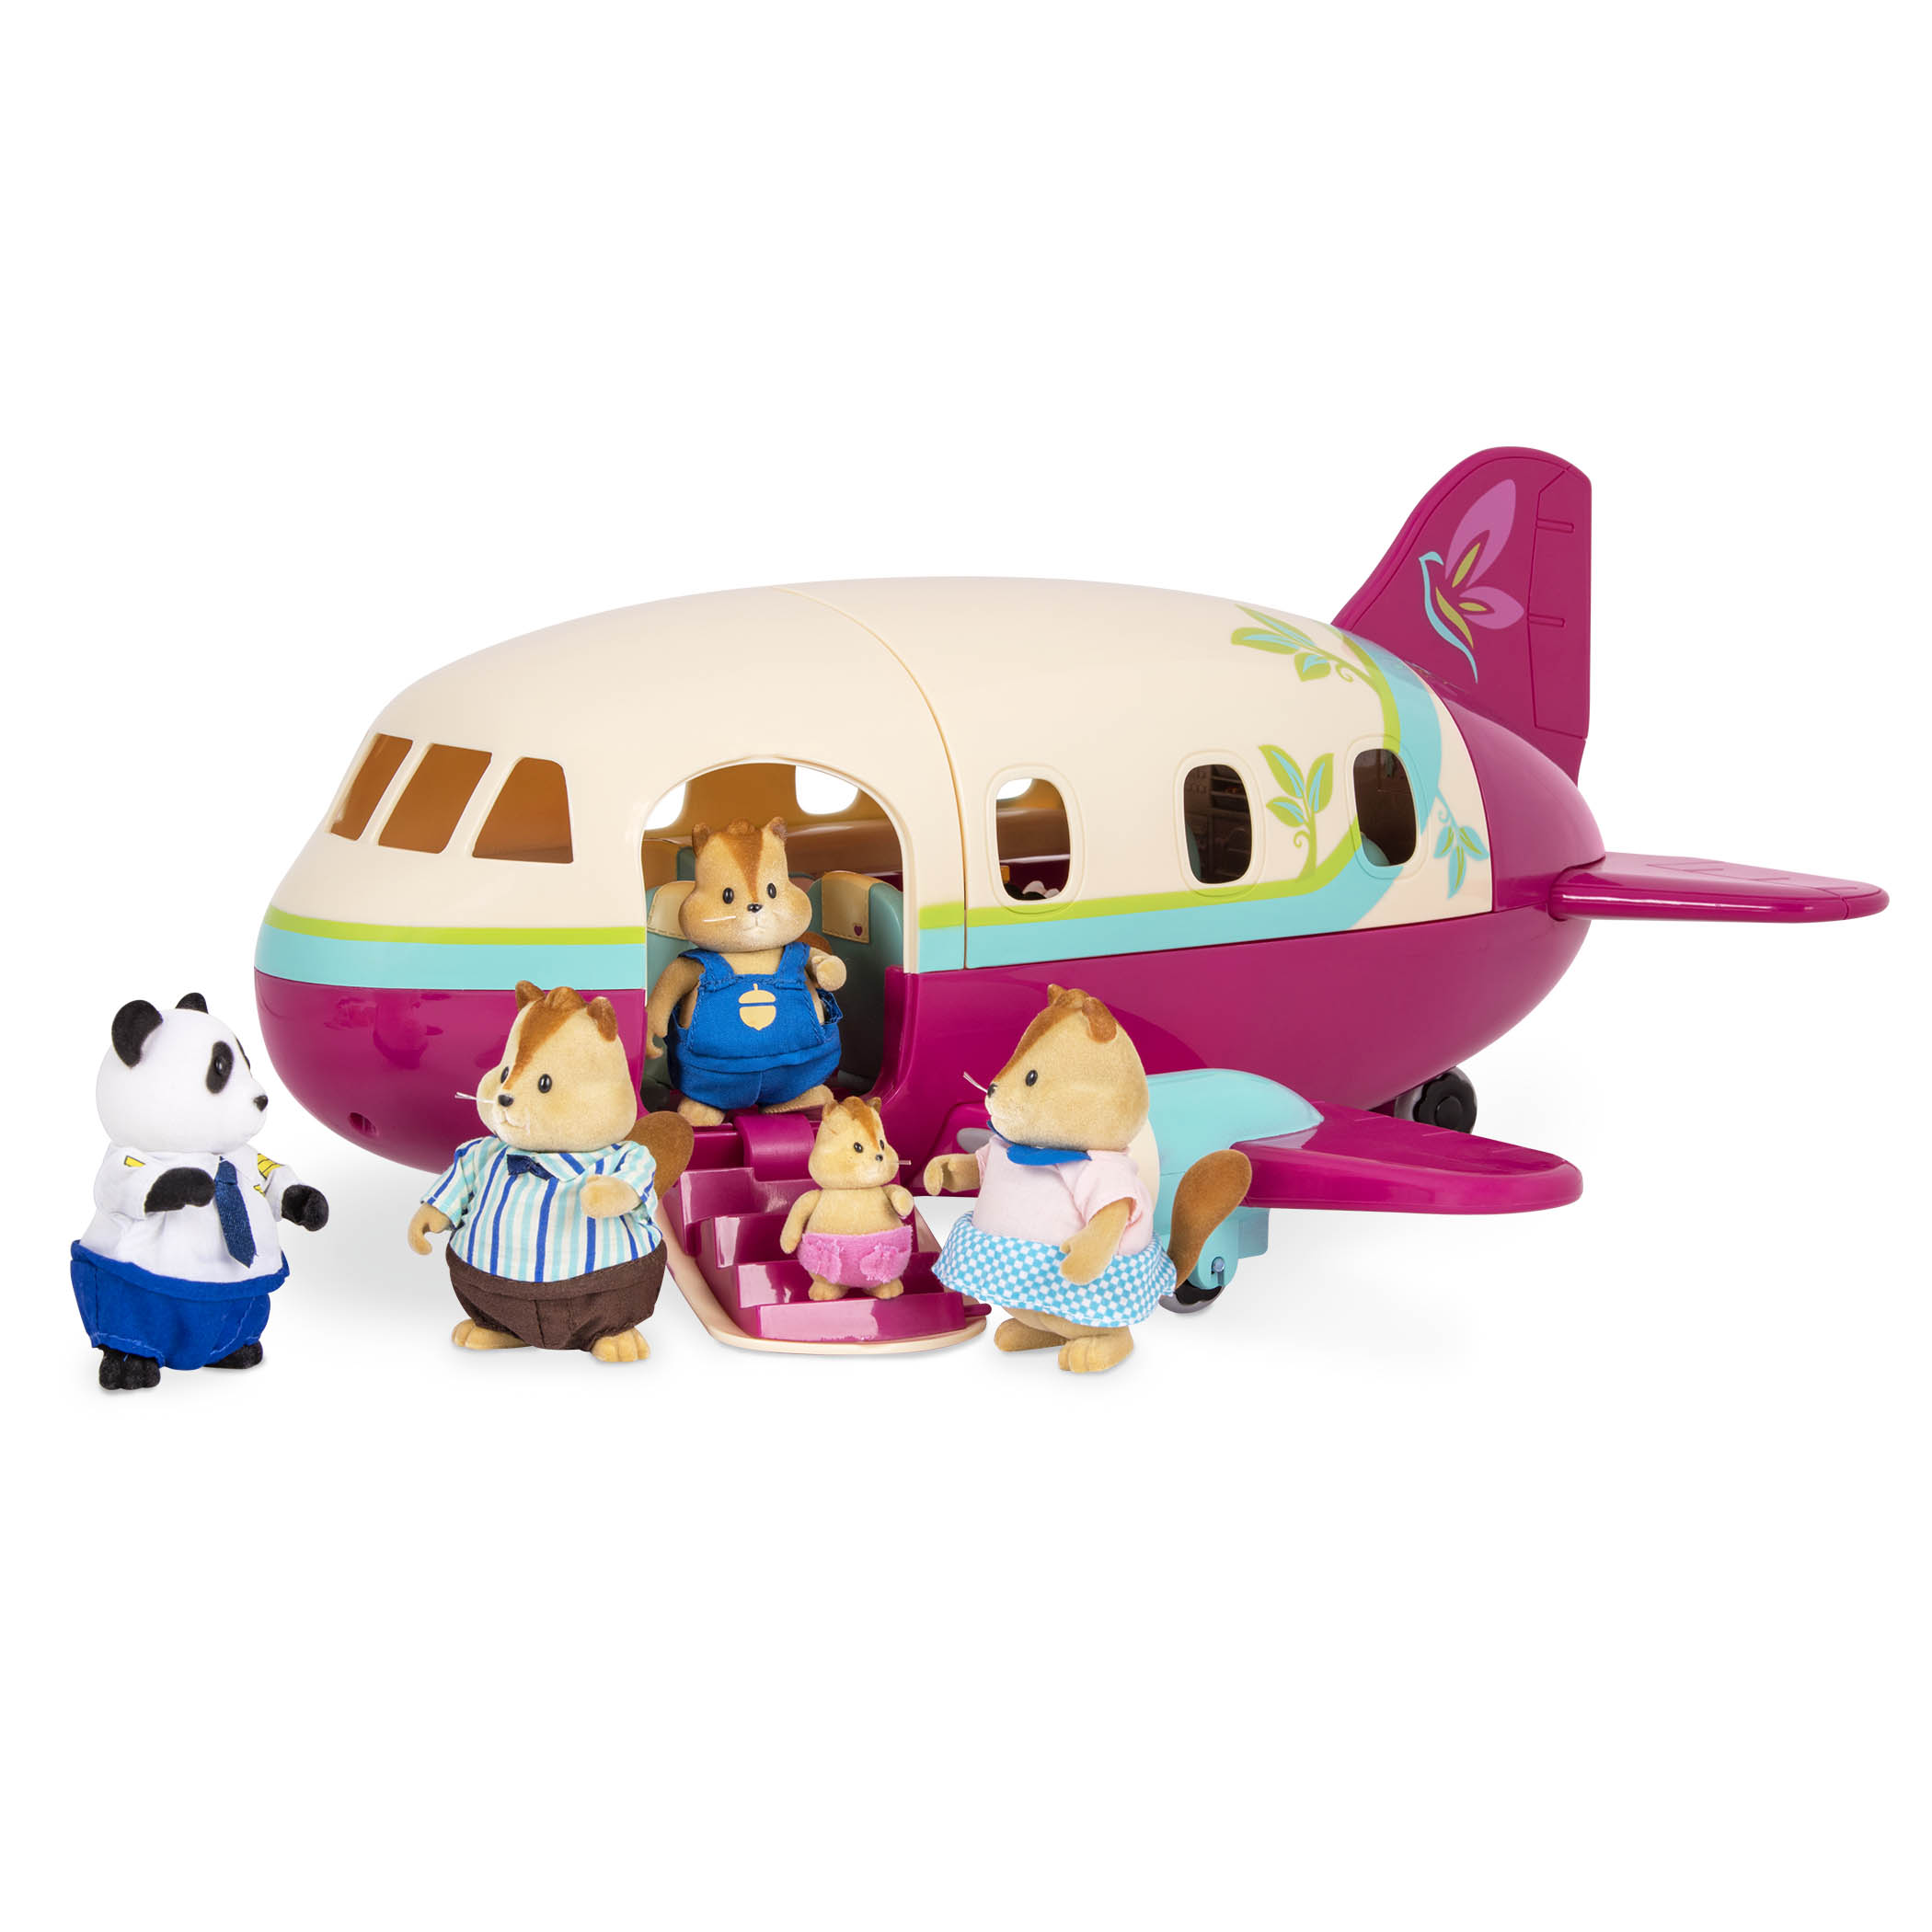 Toy airplane with animal figurines